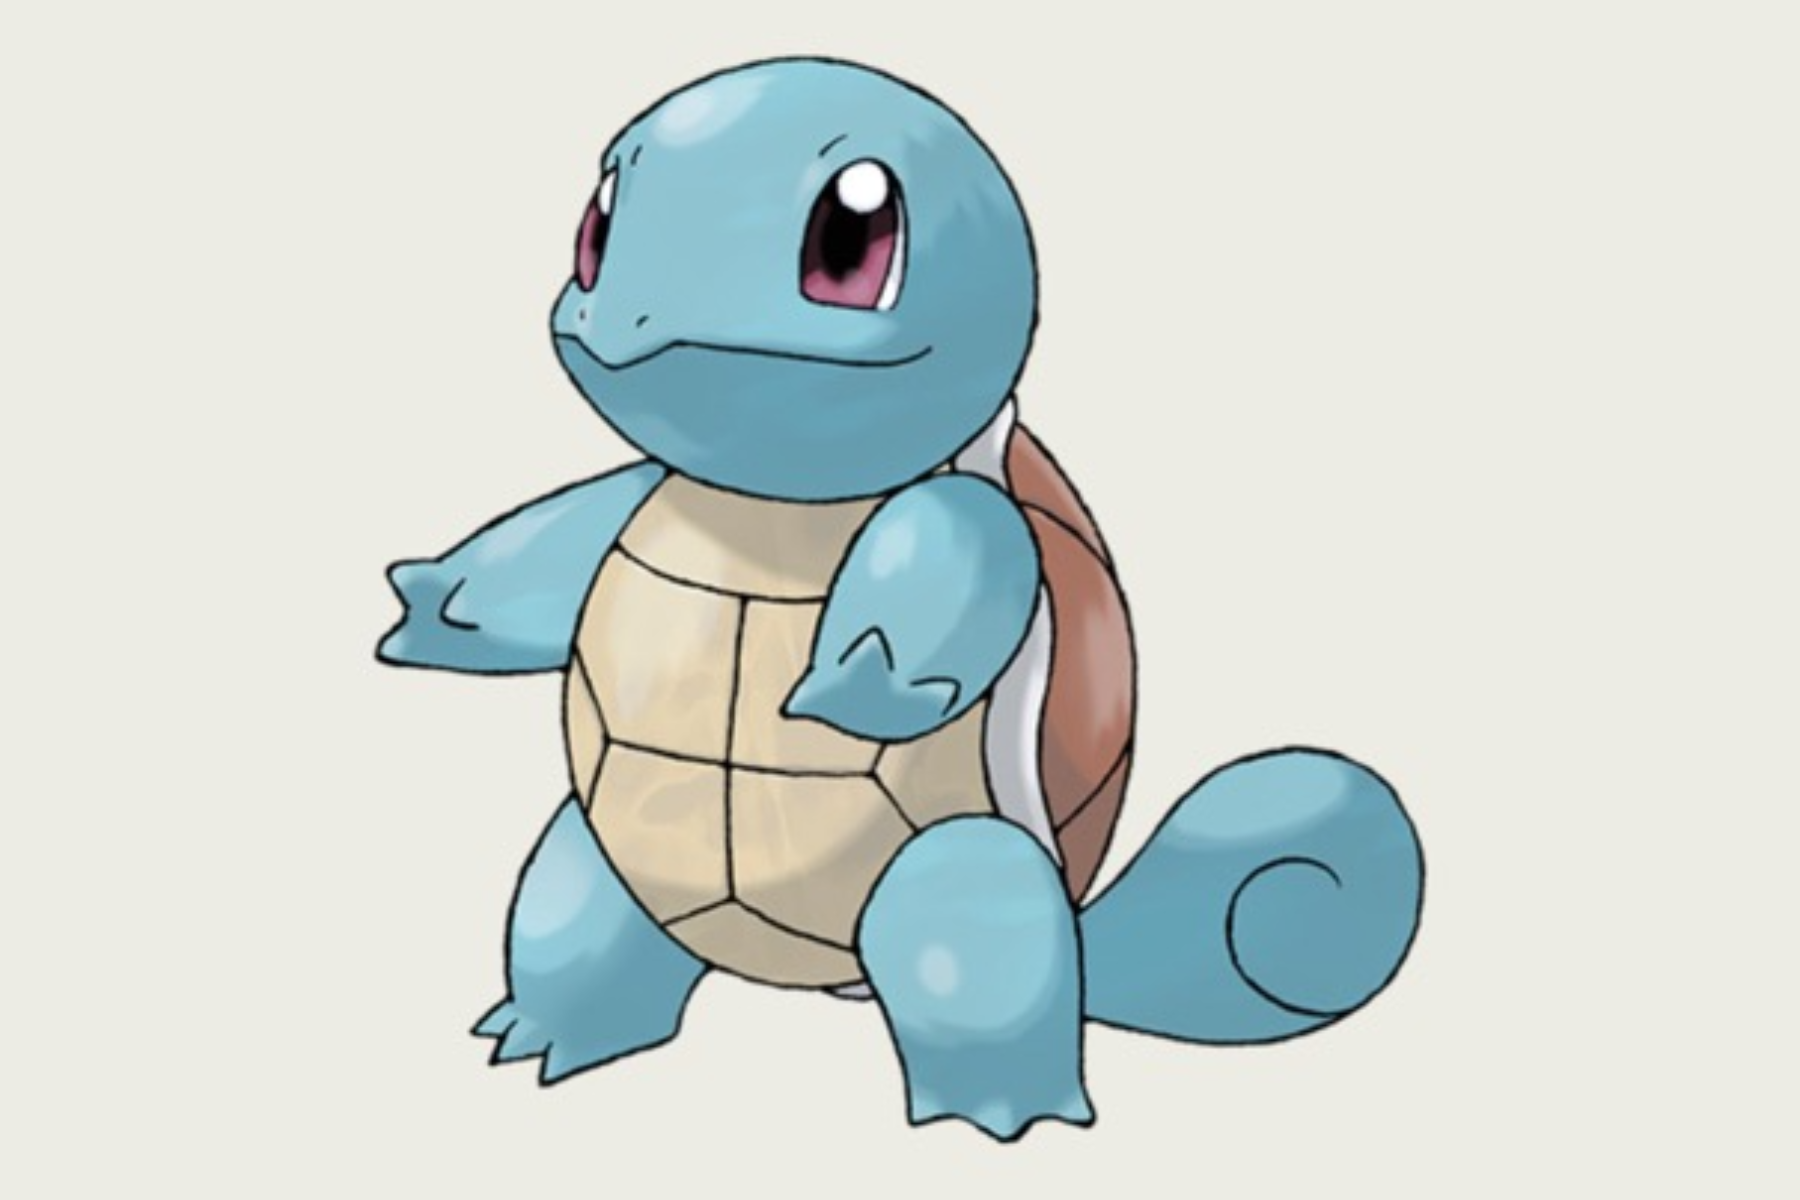 Squirtle is walking on a grey background